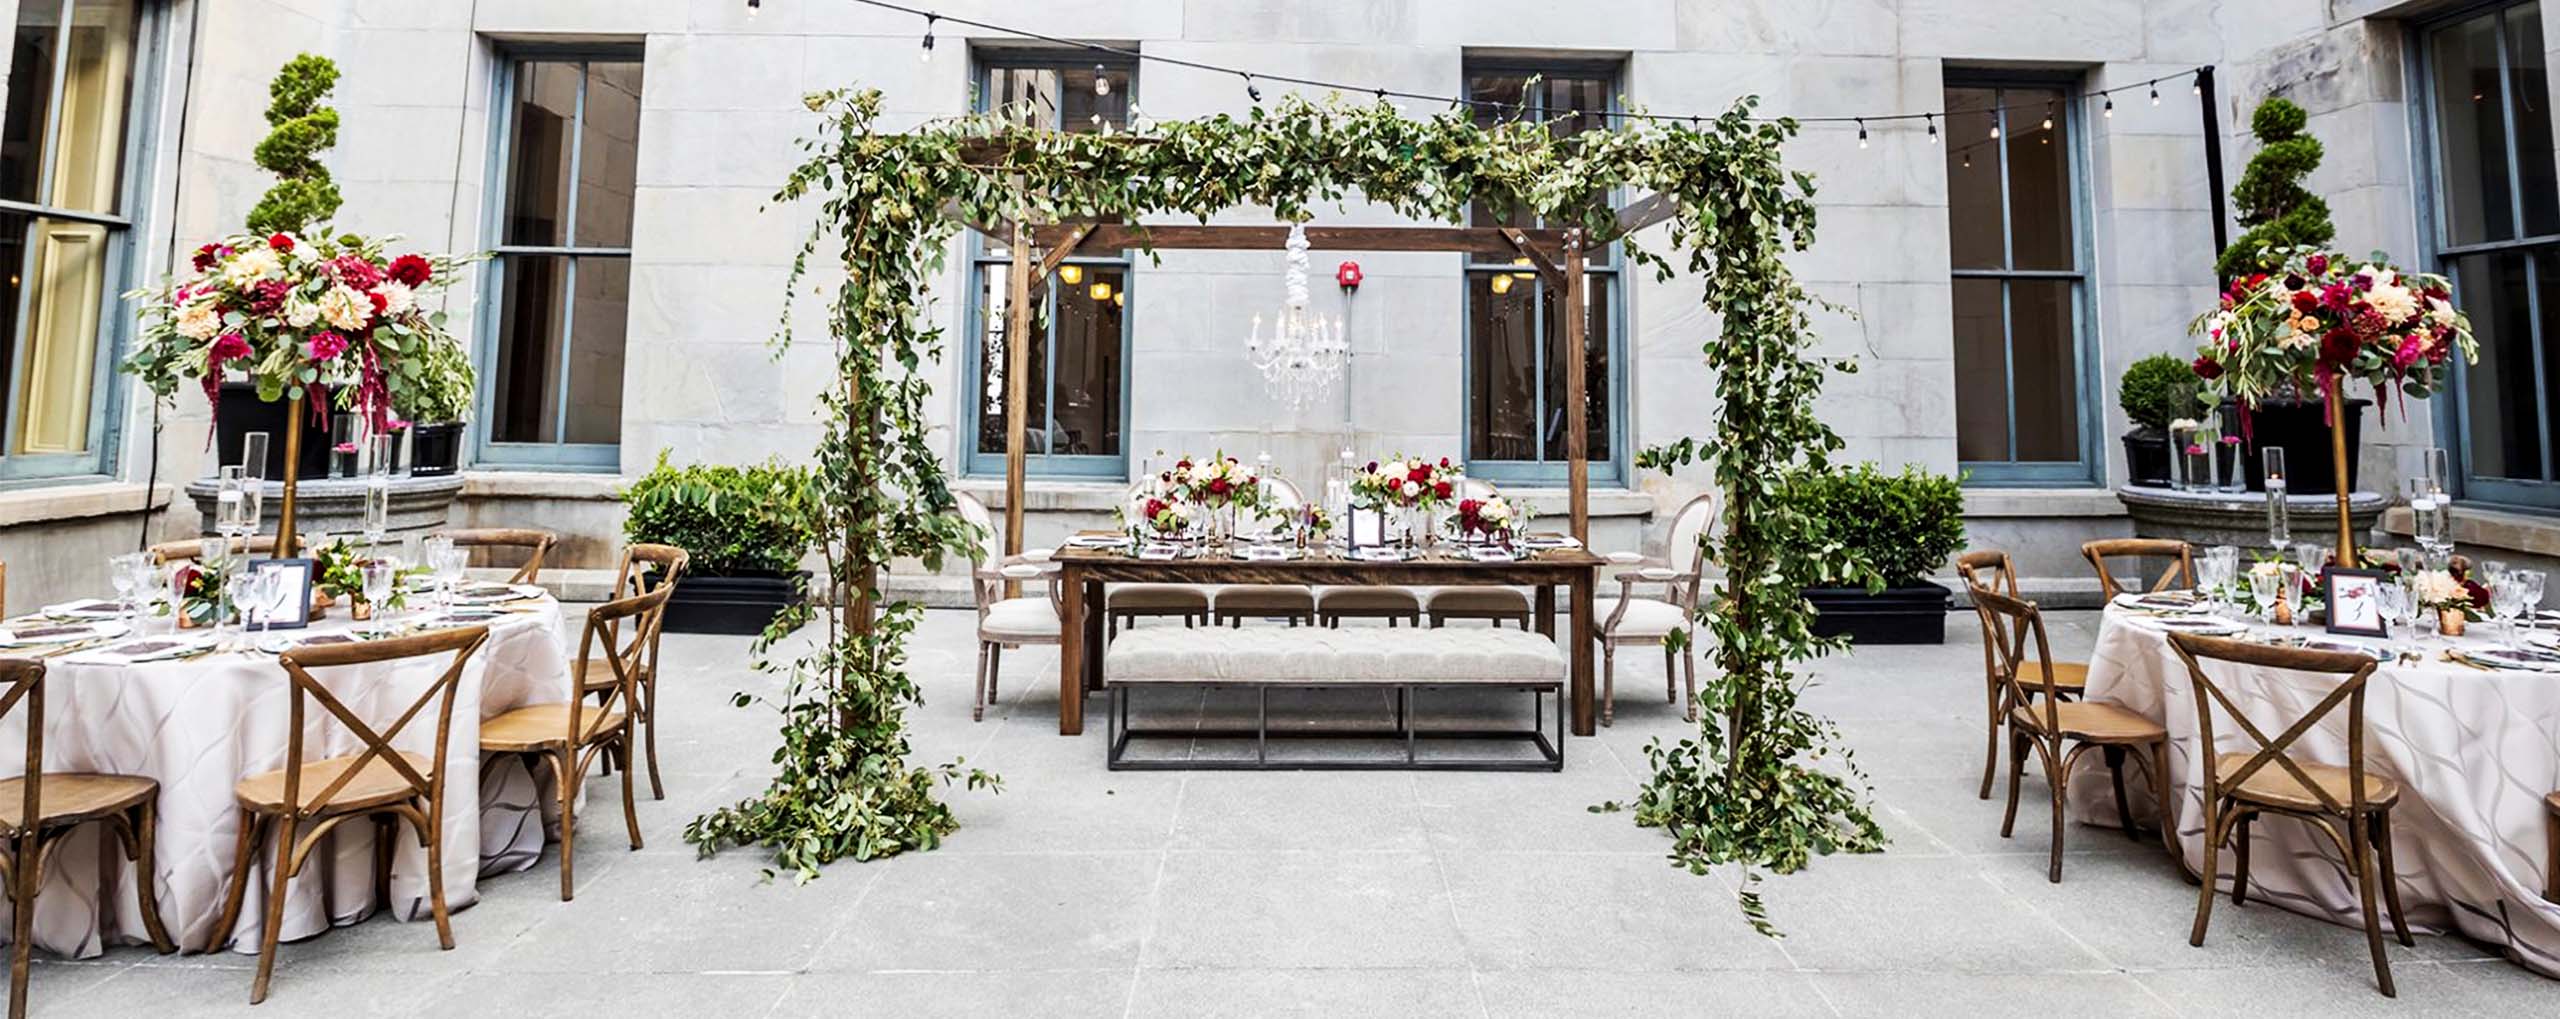 San Francisco The Mint Exterior Courtyard Event Wedding Day